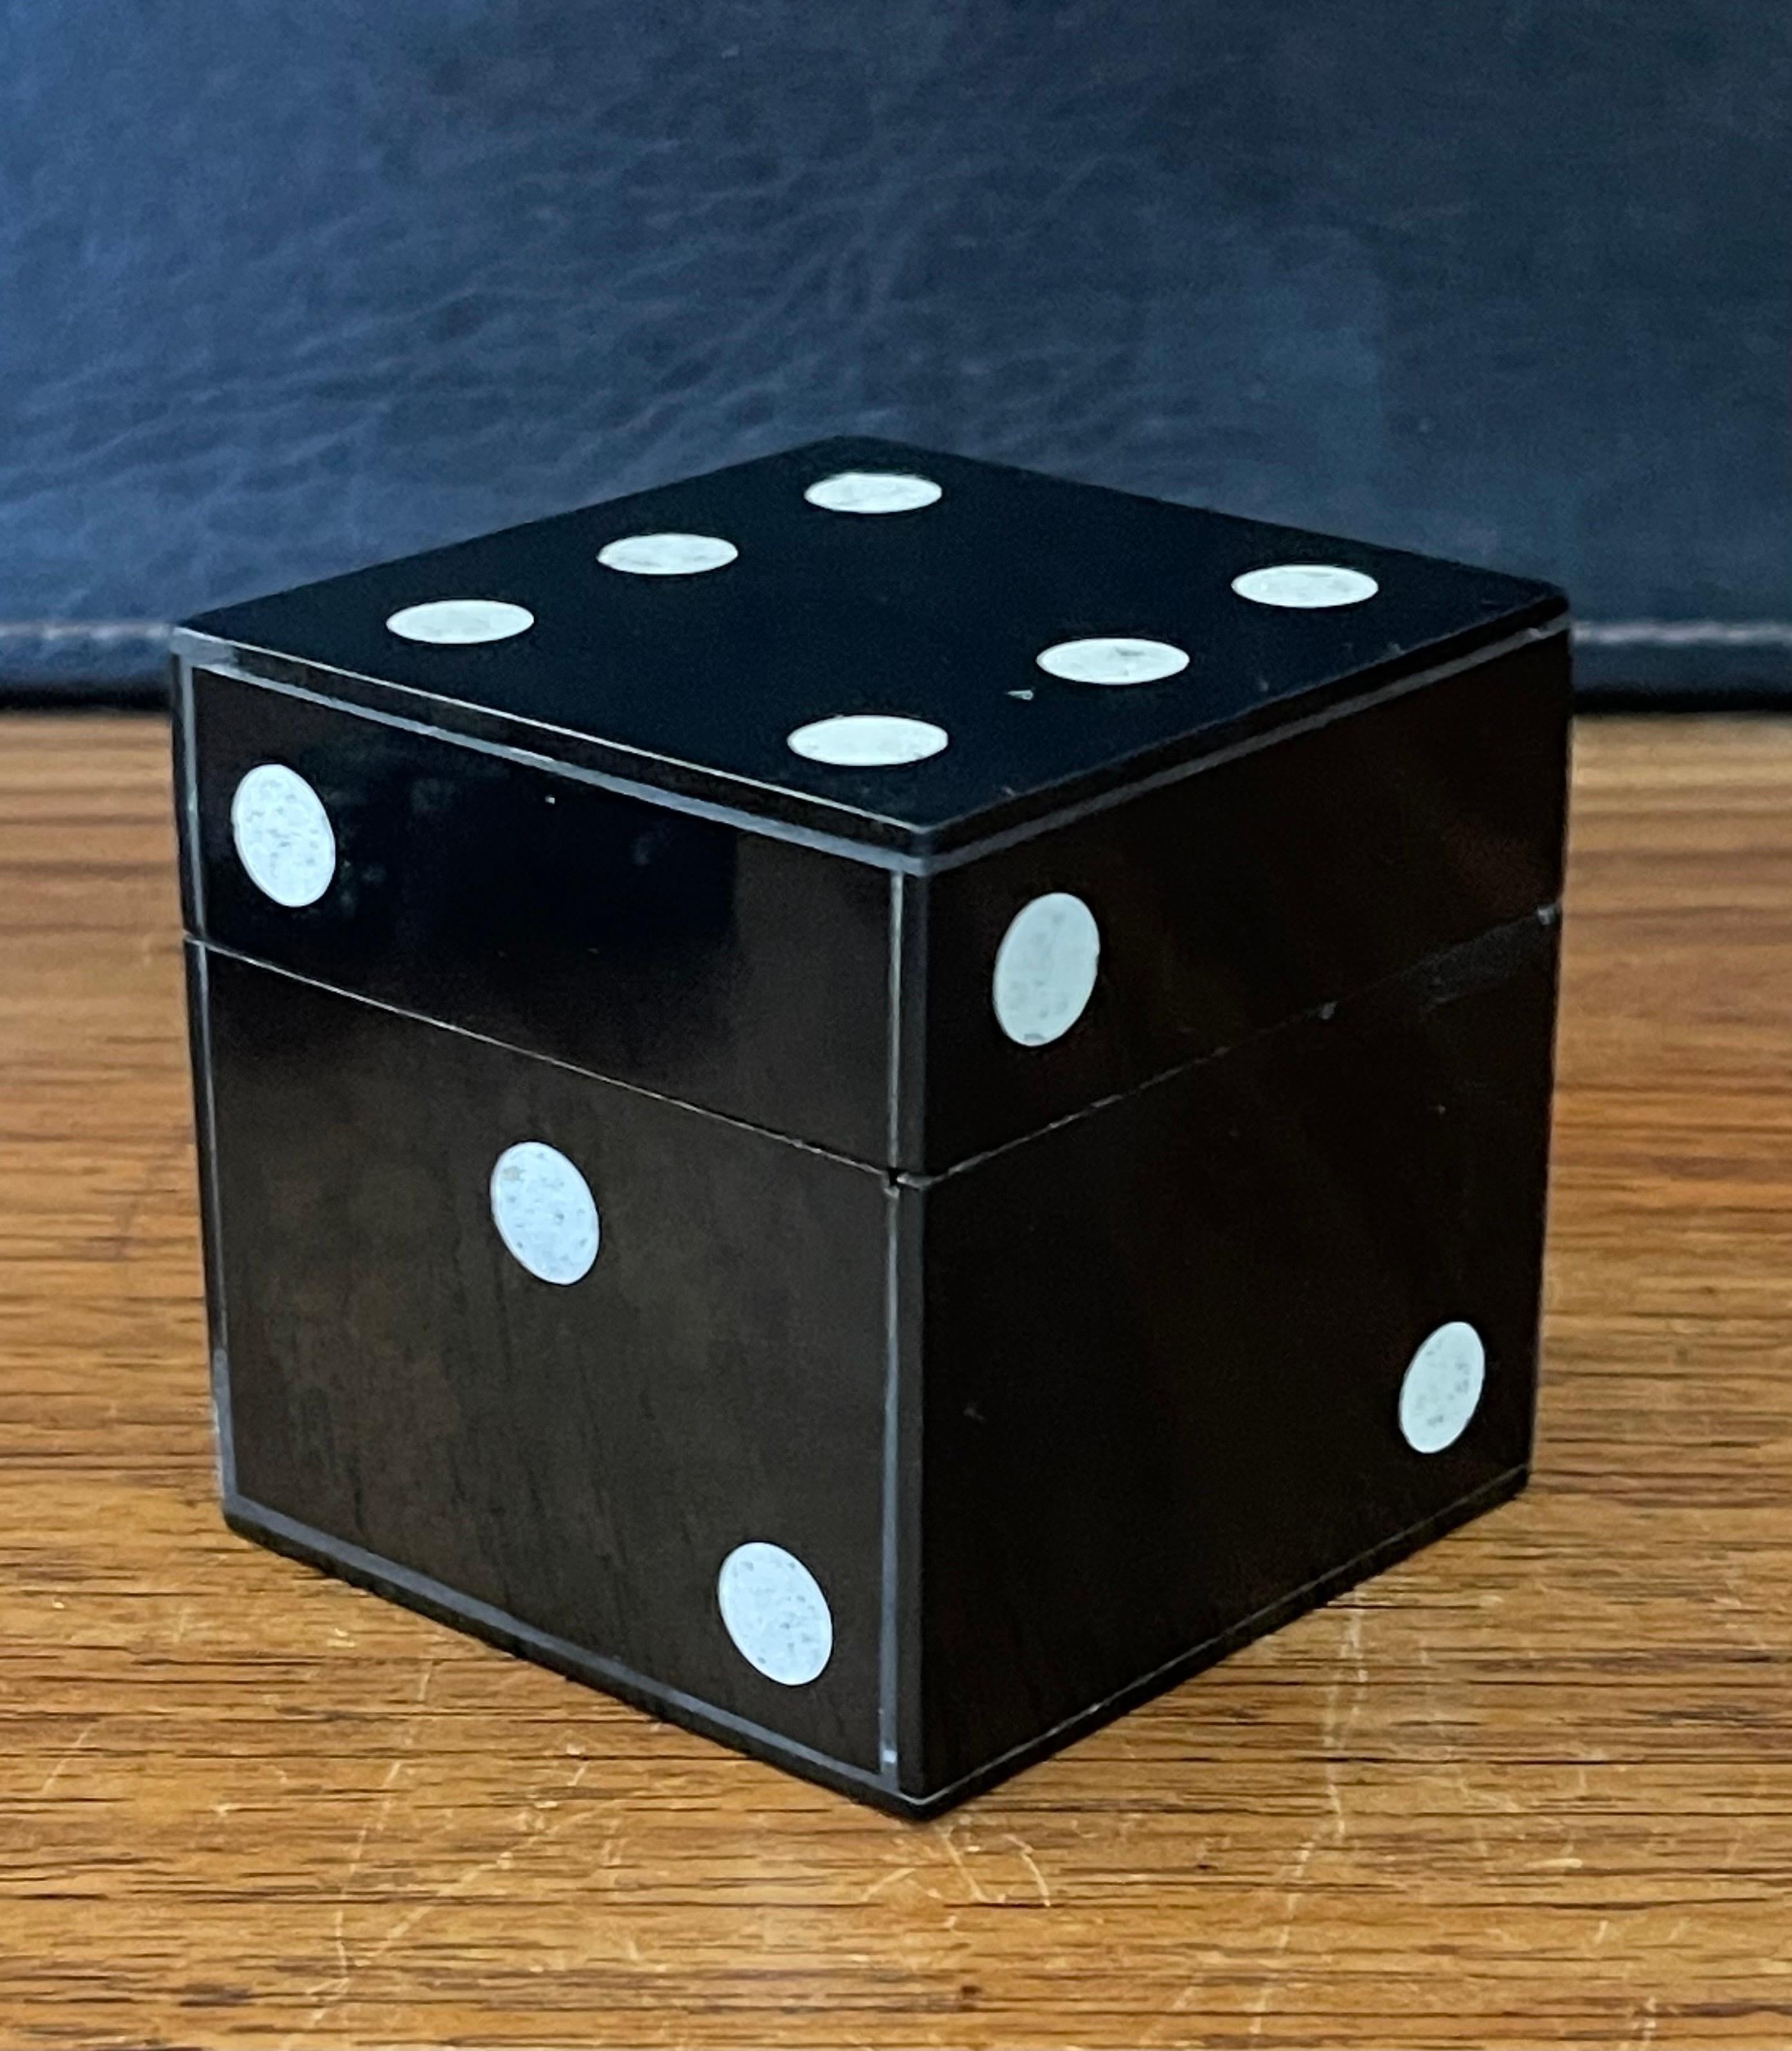 Laminated Die or Dice Paperweight / Trinket Box  For Sale